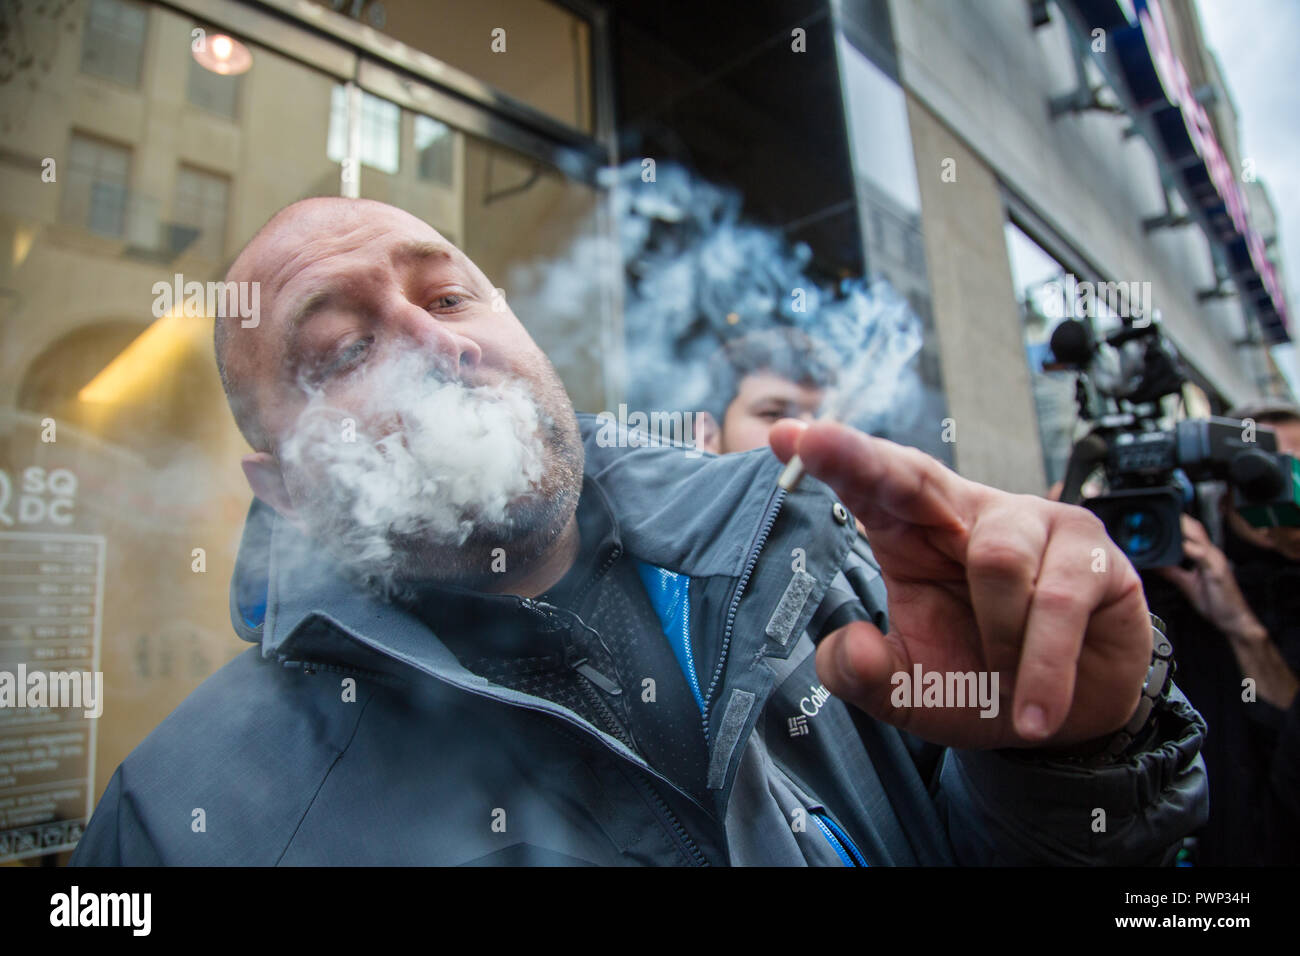 Montreal, Canada. 17th Oct, 2018. Hugo Senecal, a 39-year-old Montrealer who was at the head of that line on Montreal's Sainte Catherine street, waited since 3:30 am to be the first to buy legal marijuana at that store. Credit: Cristian Mijea/Alamy Live News Stock Photo